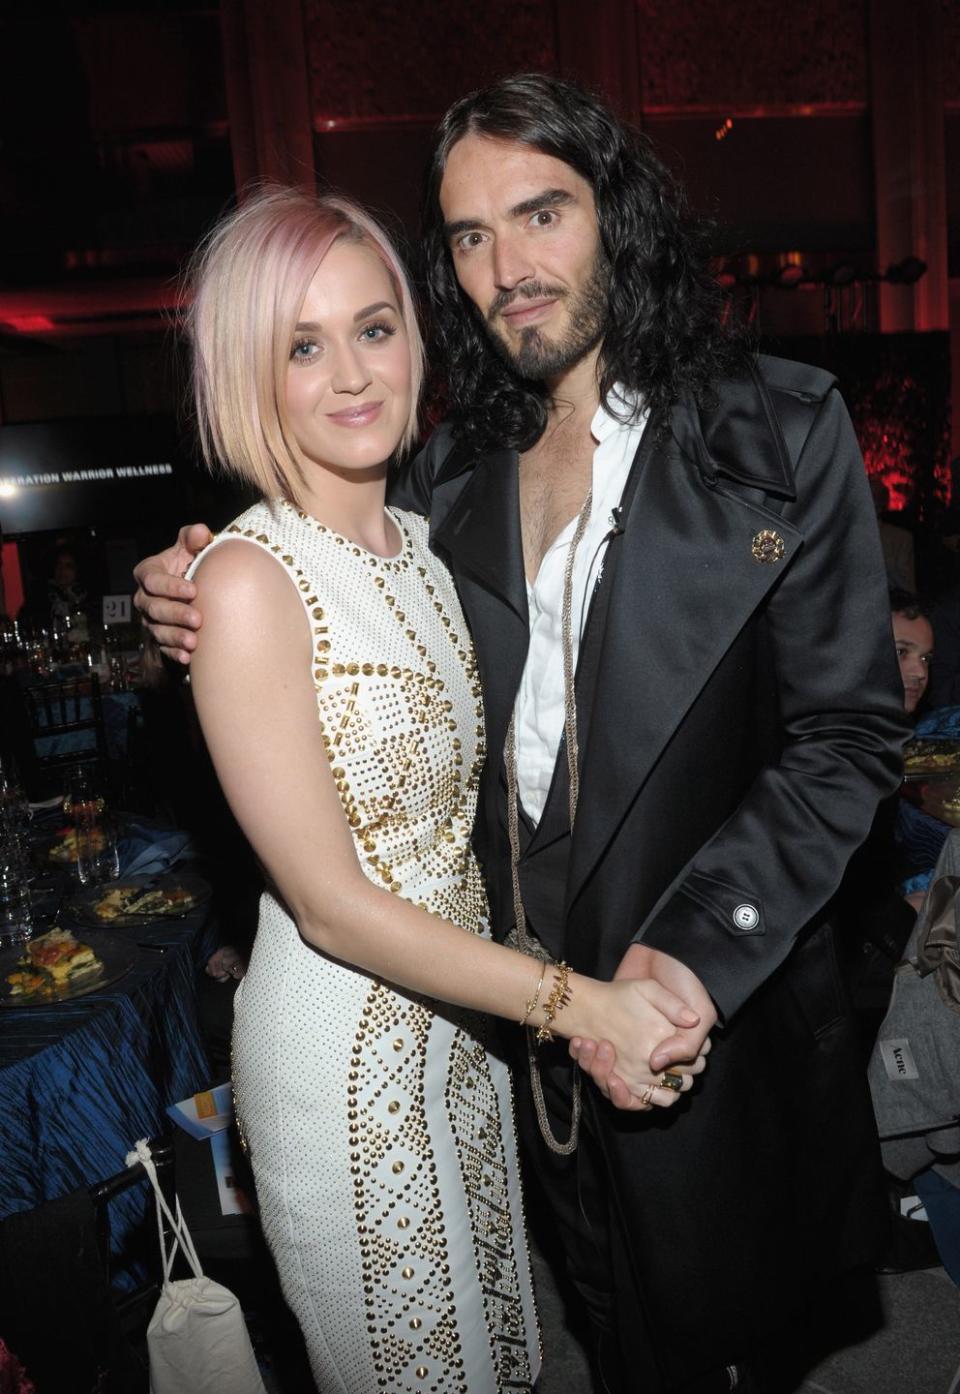 los angeles, ca december 03 singer katy perry l and actor russell brand attend the 3rd annual change begins within benefit celebration presented by the david lynch foundation held at lacma on december 3, 2011 in los angeles, california photo by michael bucknerwireimage